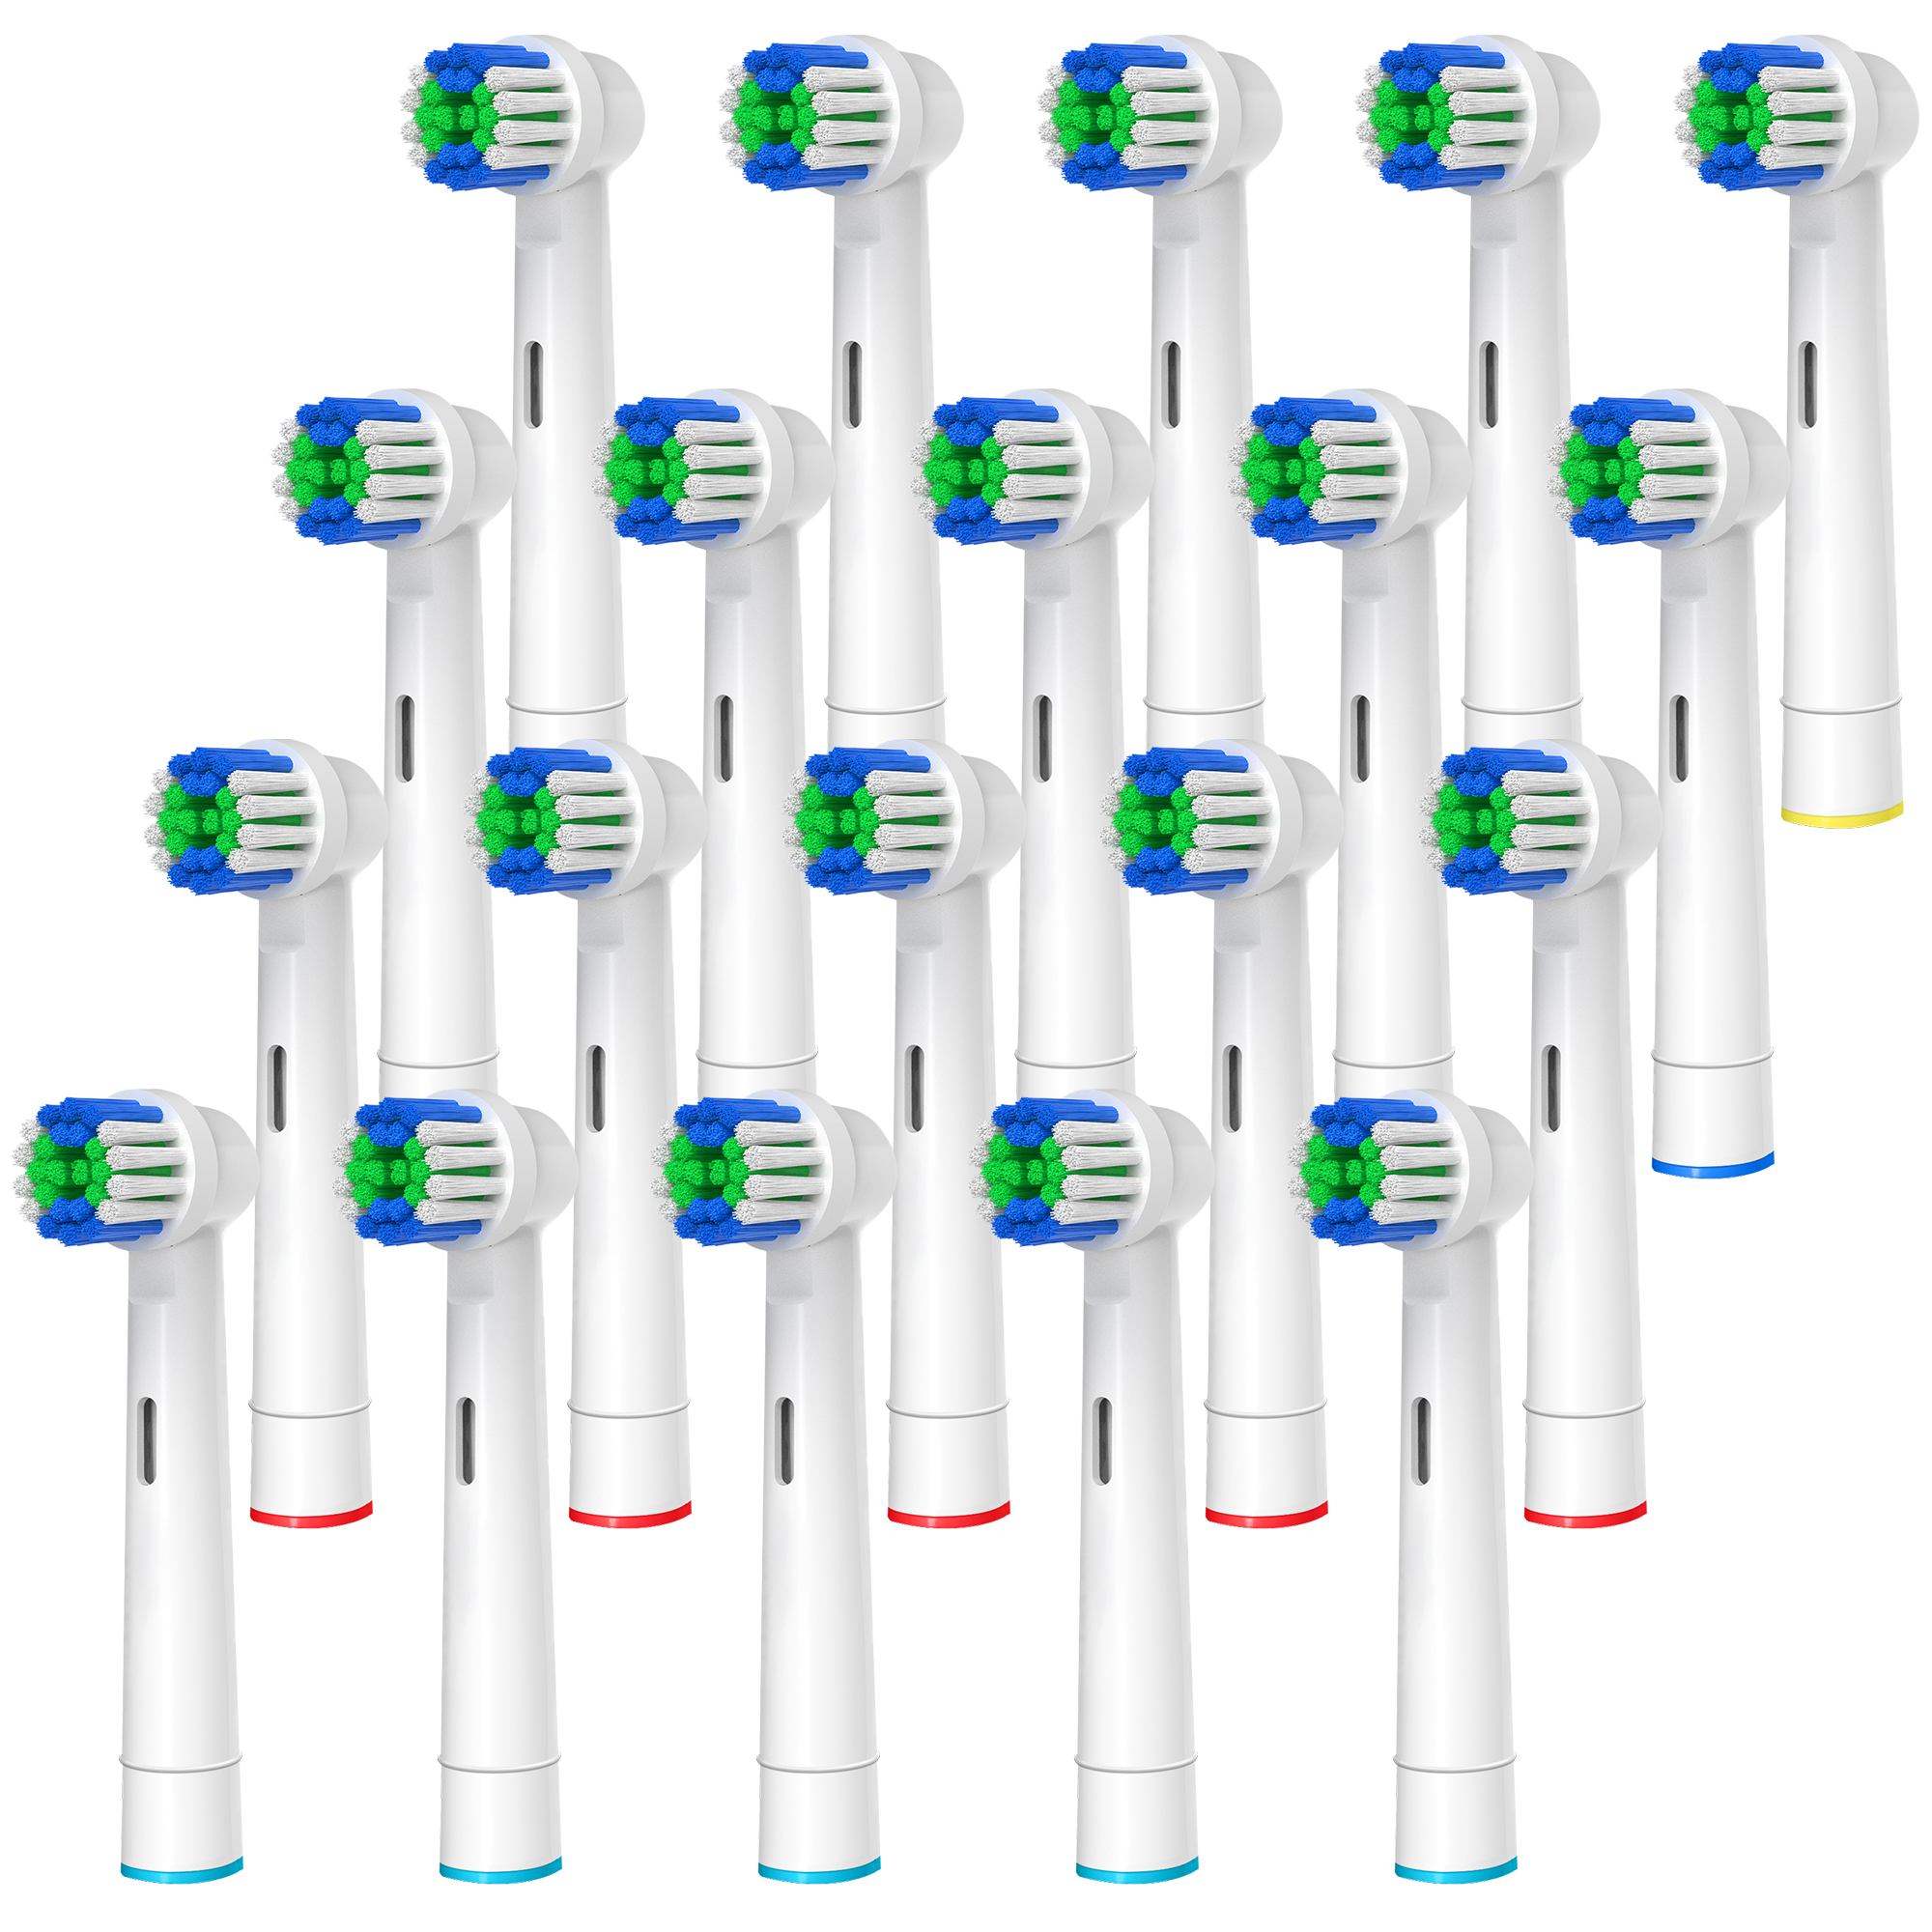 20 Pack Replacement Toothbrush Brush Heads for Braun Oral-b Vitality Clean - image 1 of 9